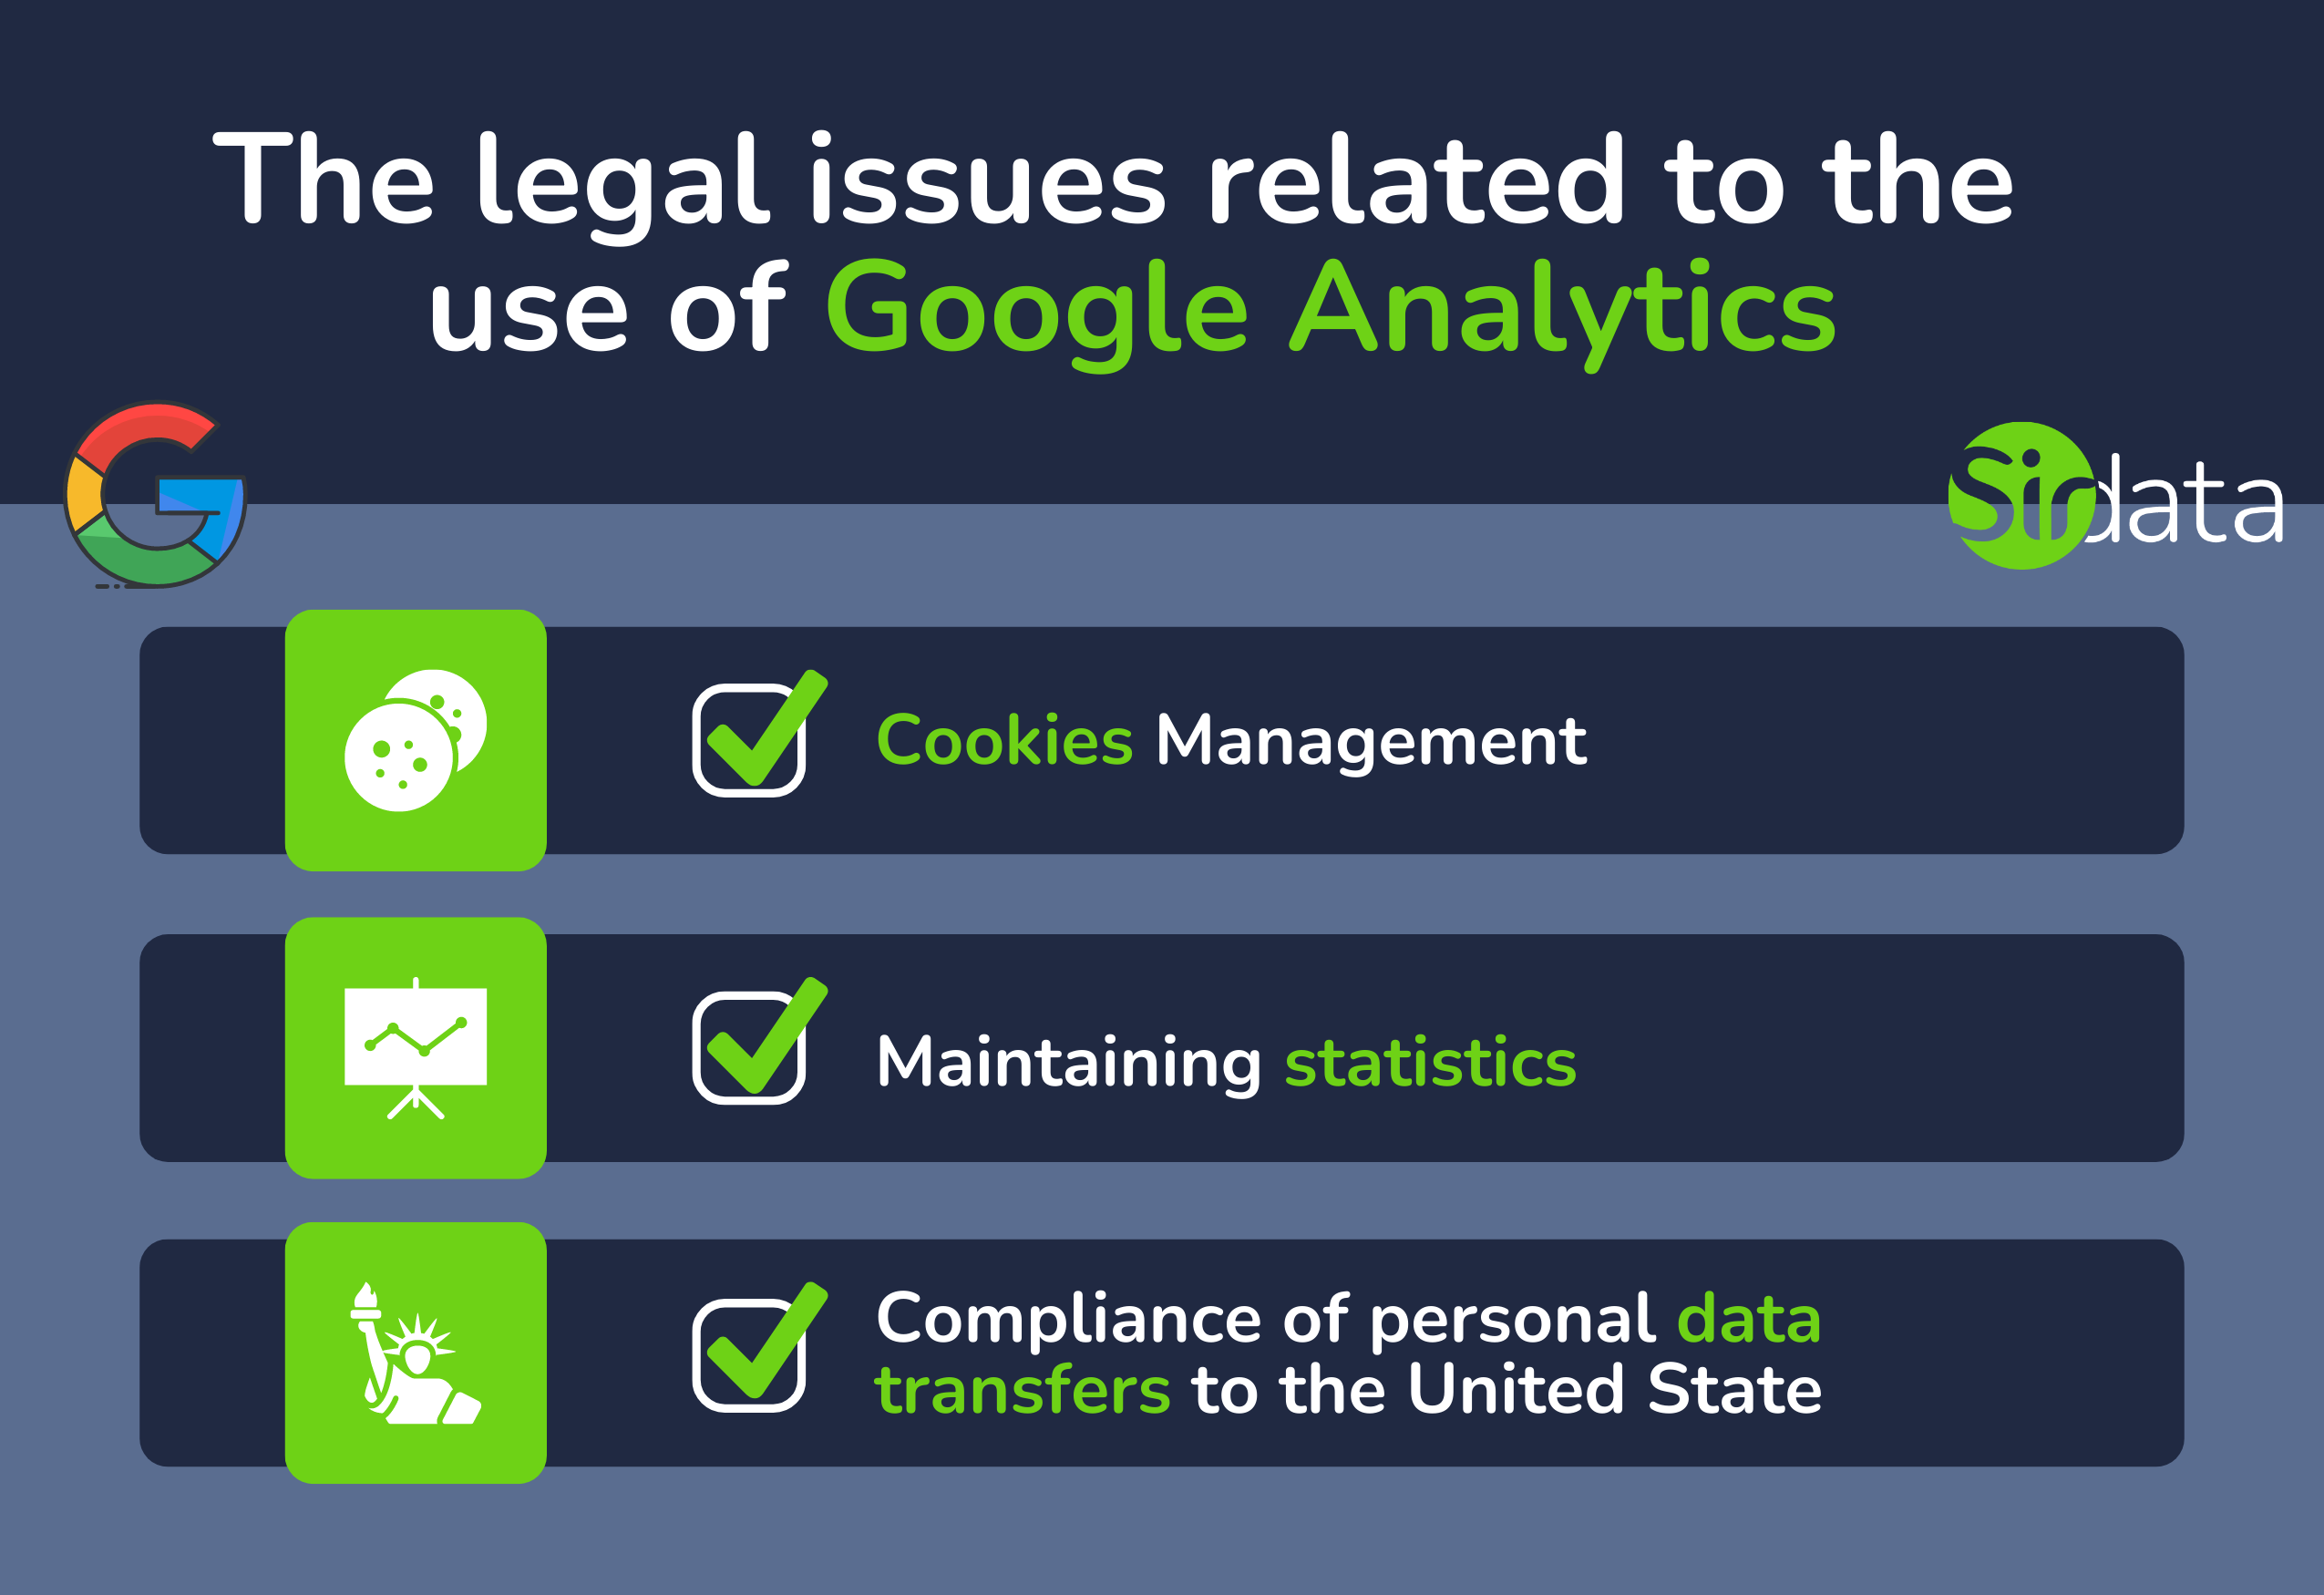 Everything you should know about legal issues related to the use of Google Analytics